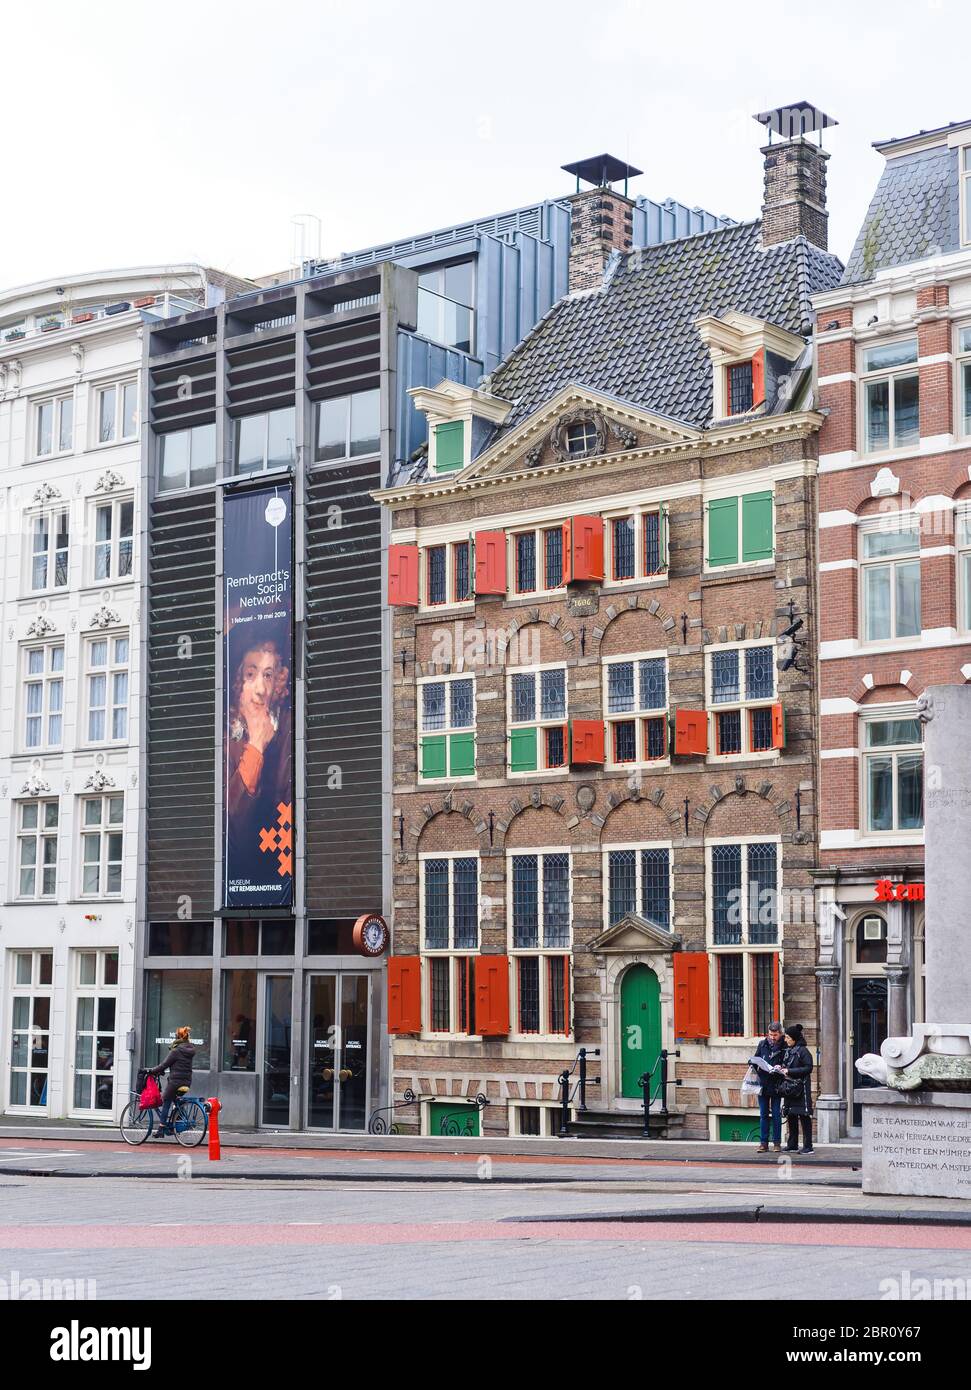 Amsterdam,The Netherlands- March 13, 2019: The Rembrandt House is a house in the in the center of Amsterdam, now a museum. Stock Photo